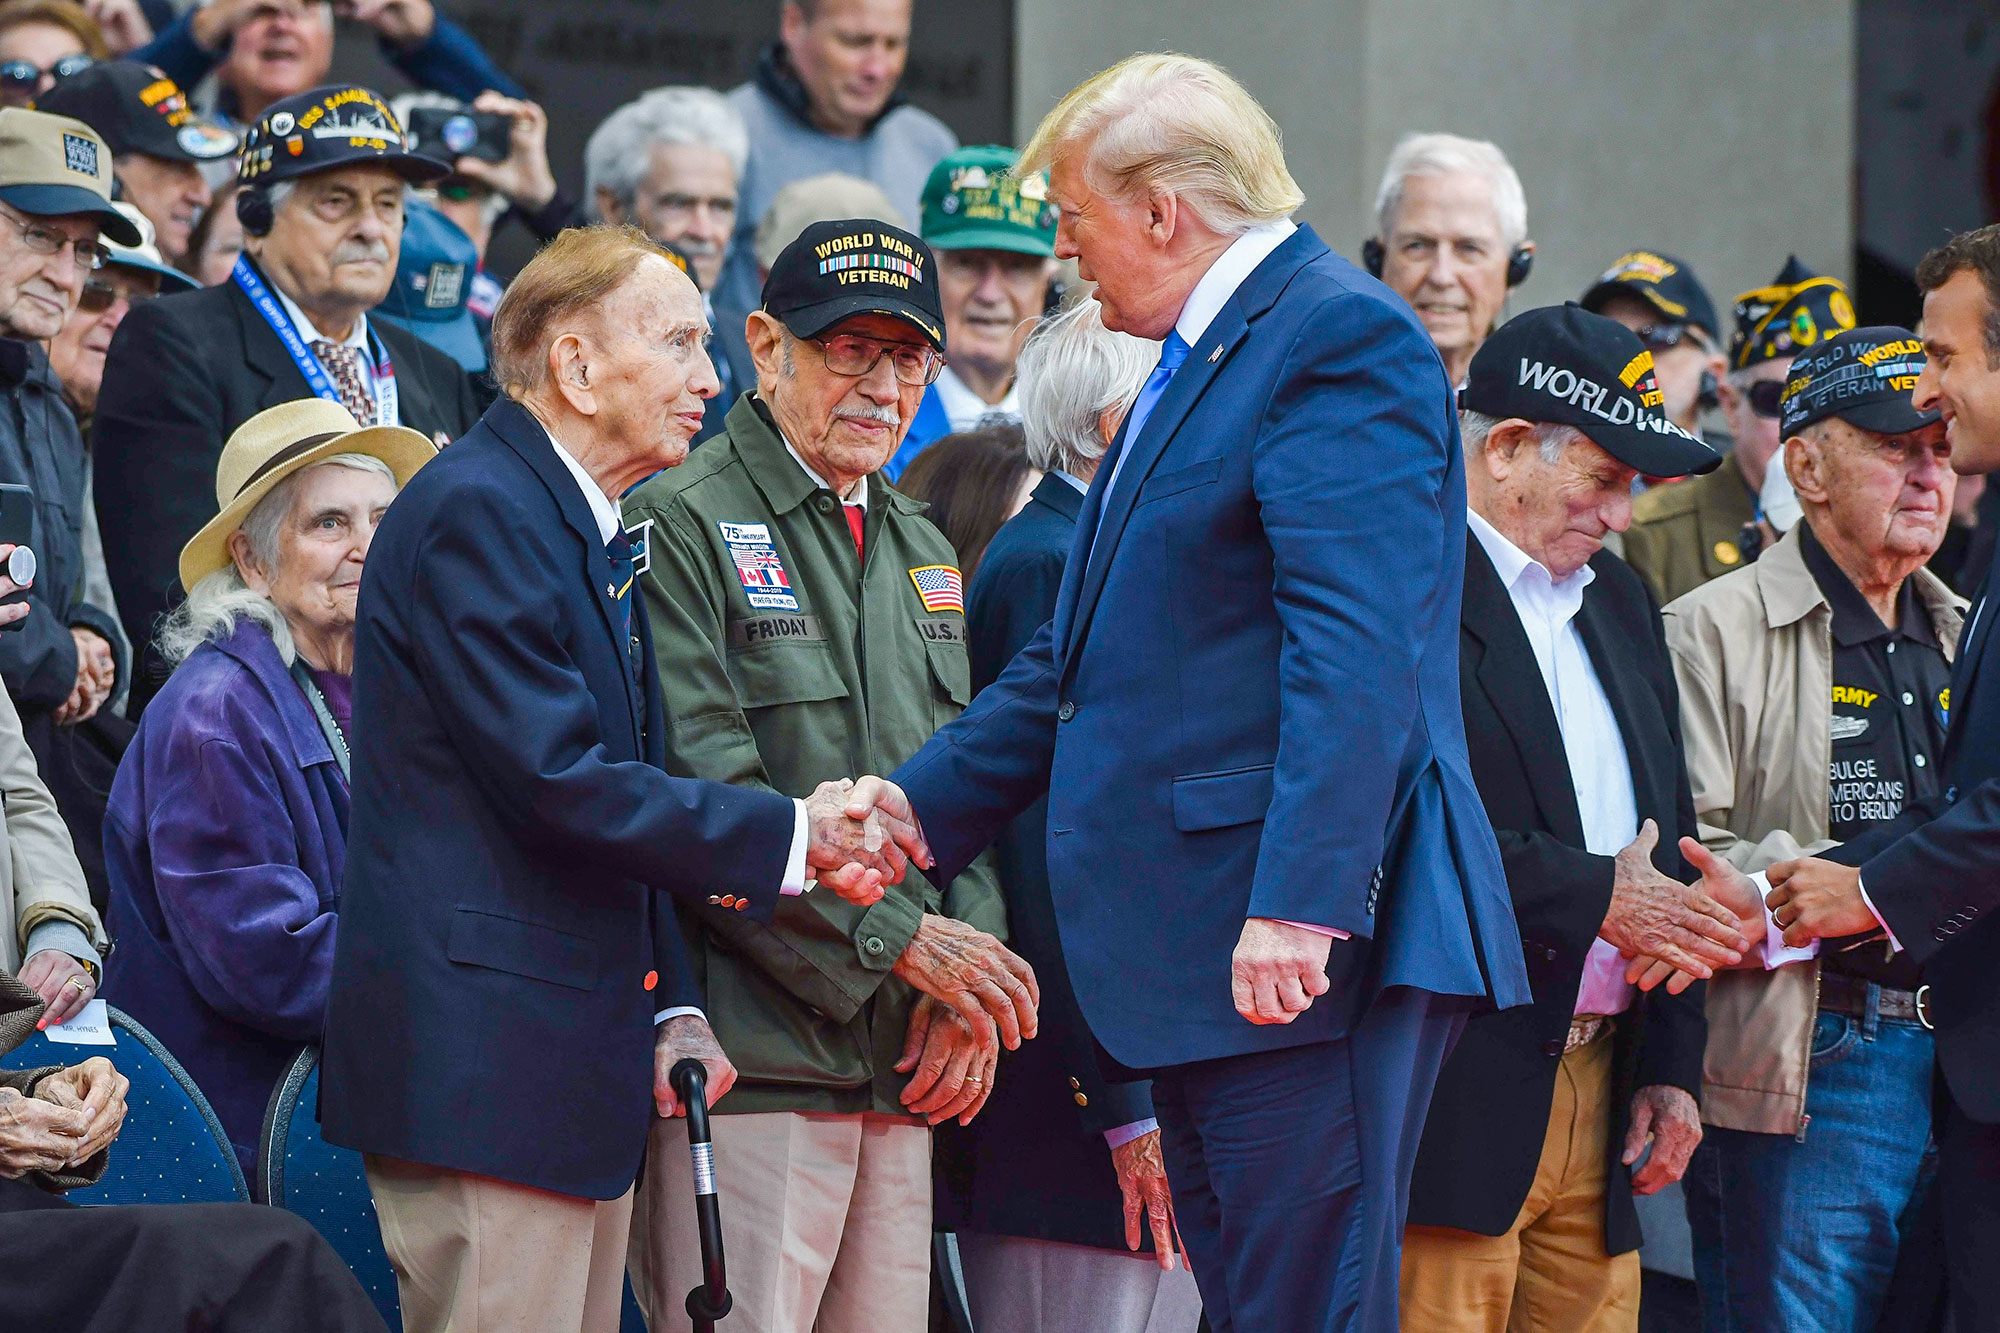 President Donald J. Trump talks with World War II veterans attending the 75th D-Day anniversary ceremony at the Normandy American Cemetery and Memorial in Colleville-sur-Mer, France, June 6, 2019.